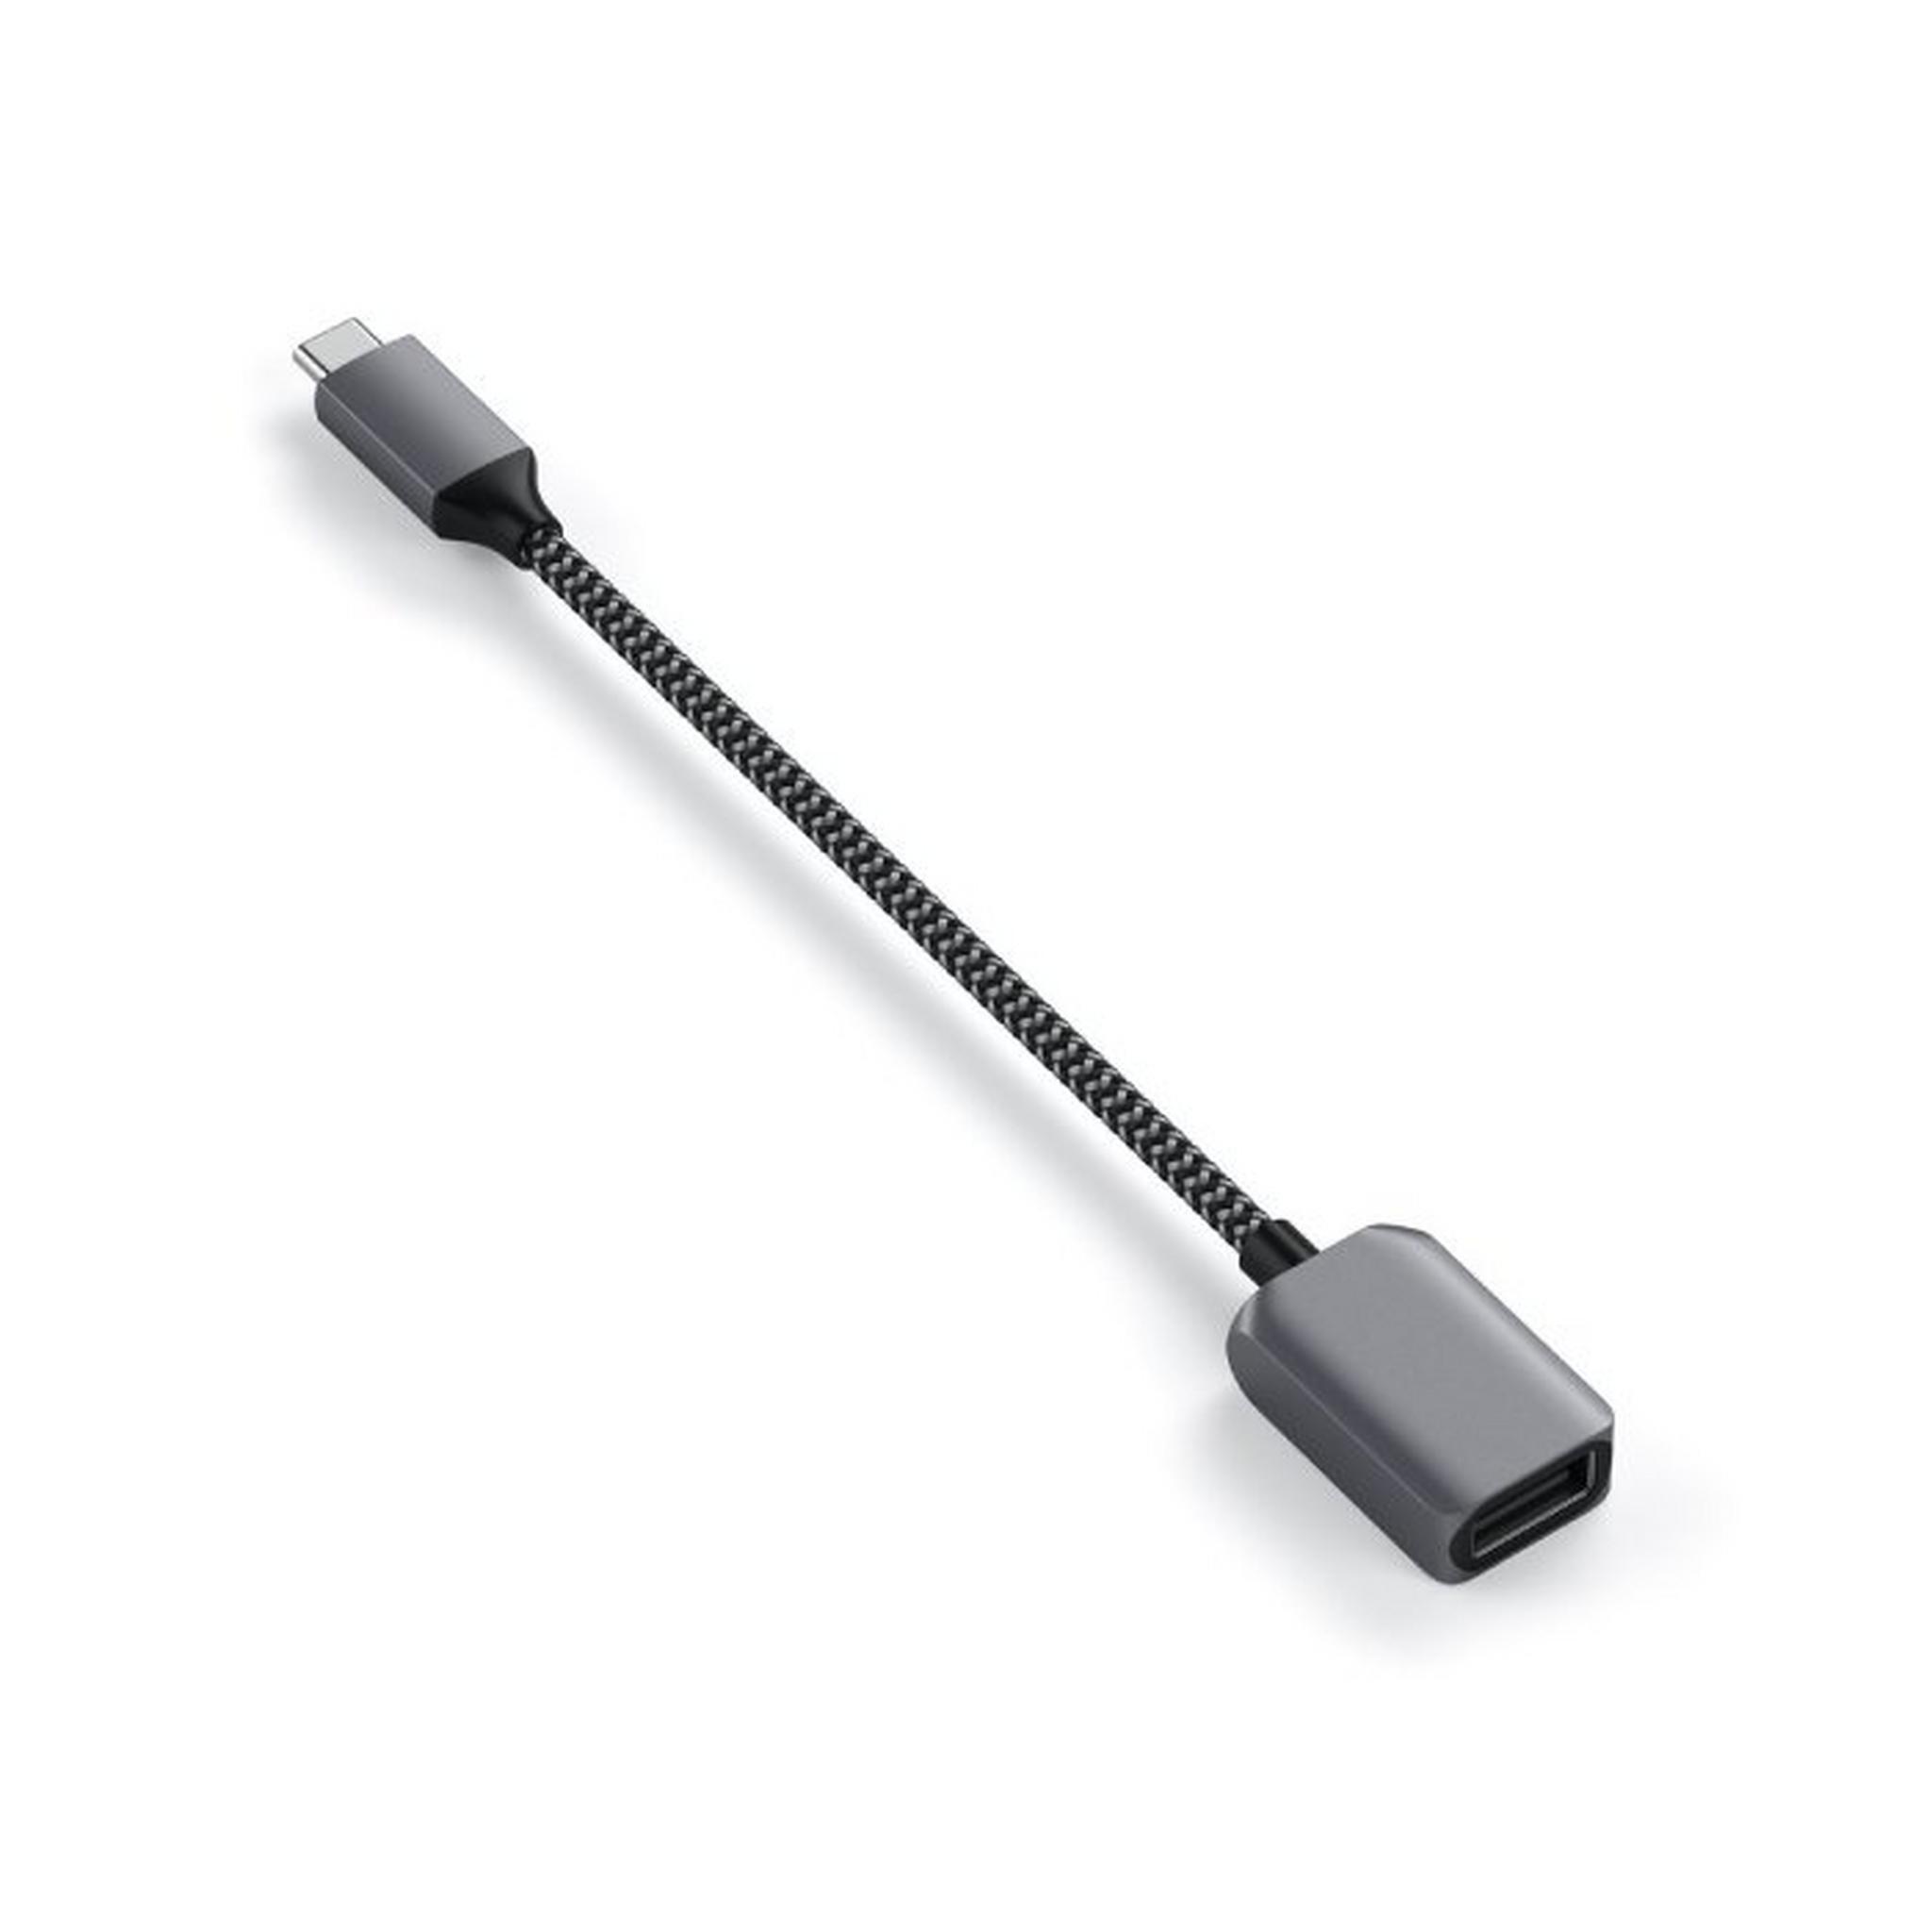 Satechi USB-C to USB 3.0 Connector - Space Grey